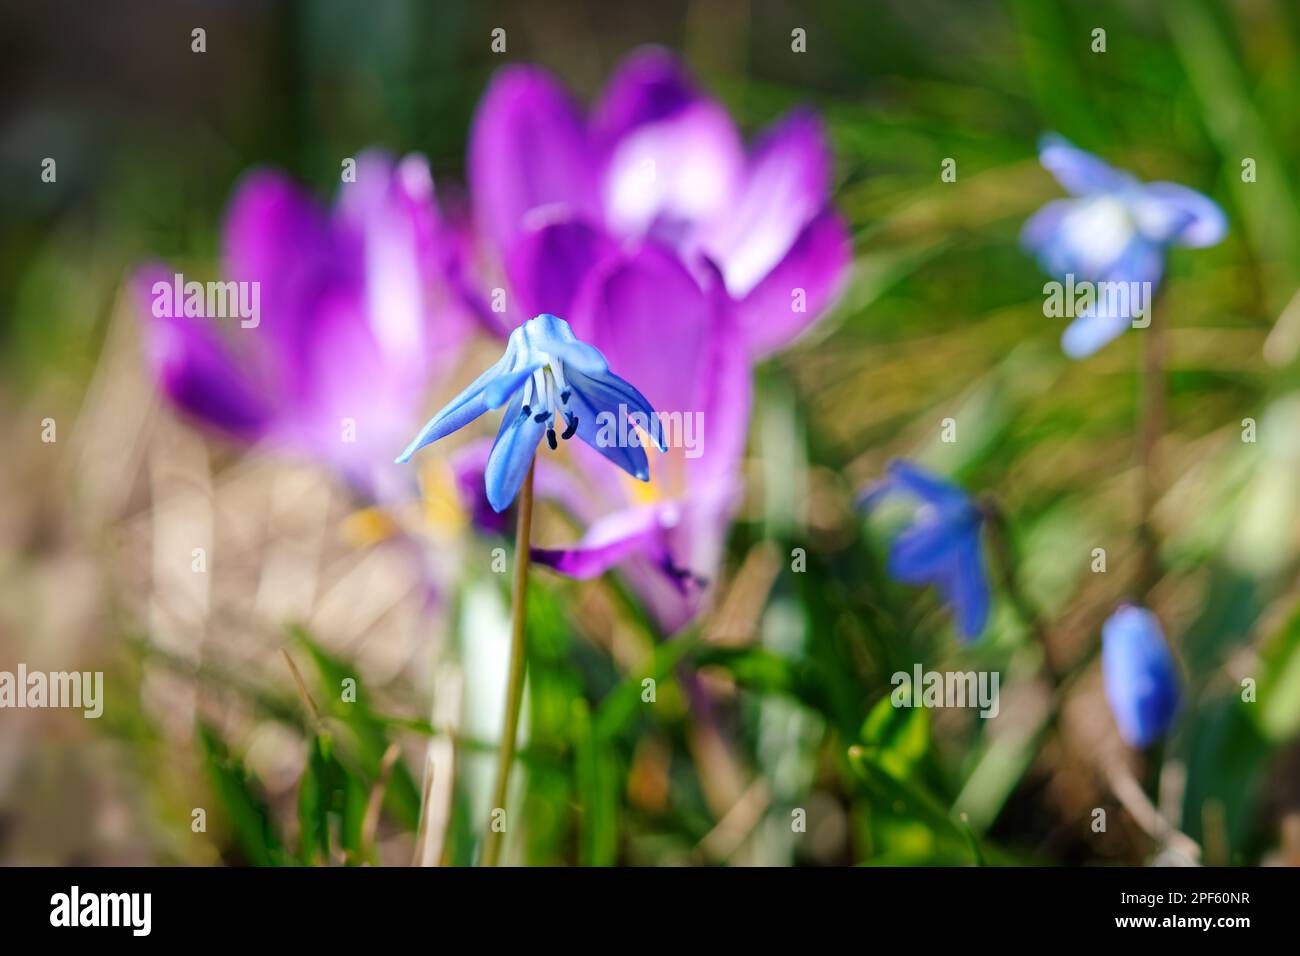 Close-up of the blue blossom of a blue star, behind it violet crocus blossoms, further blossoms in background blur Stock Photo